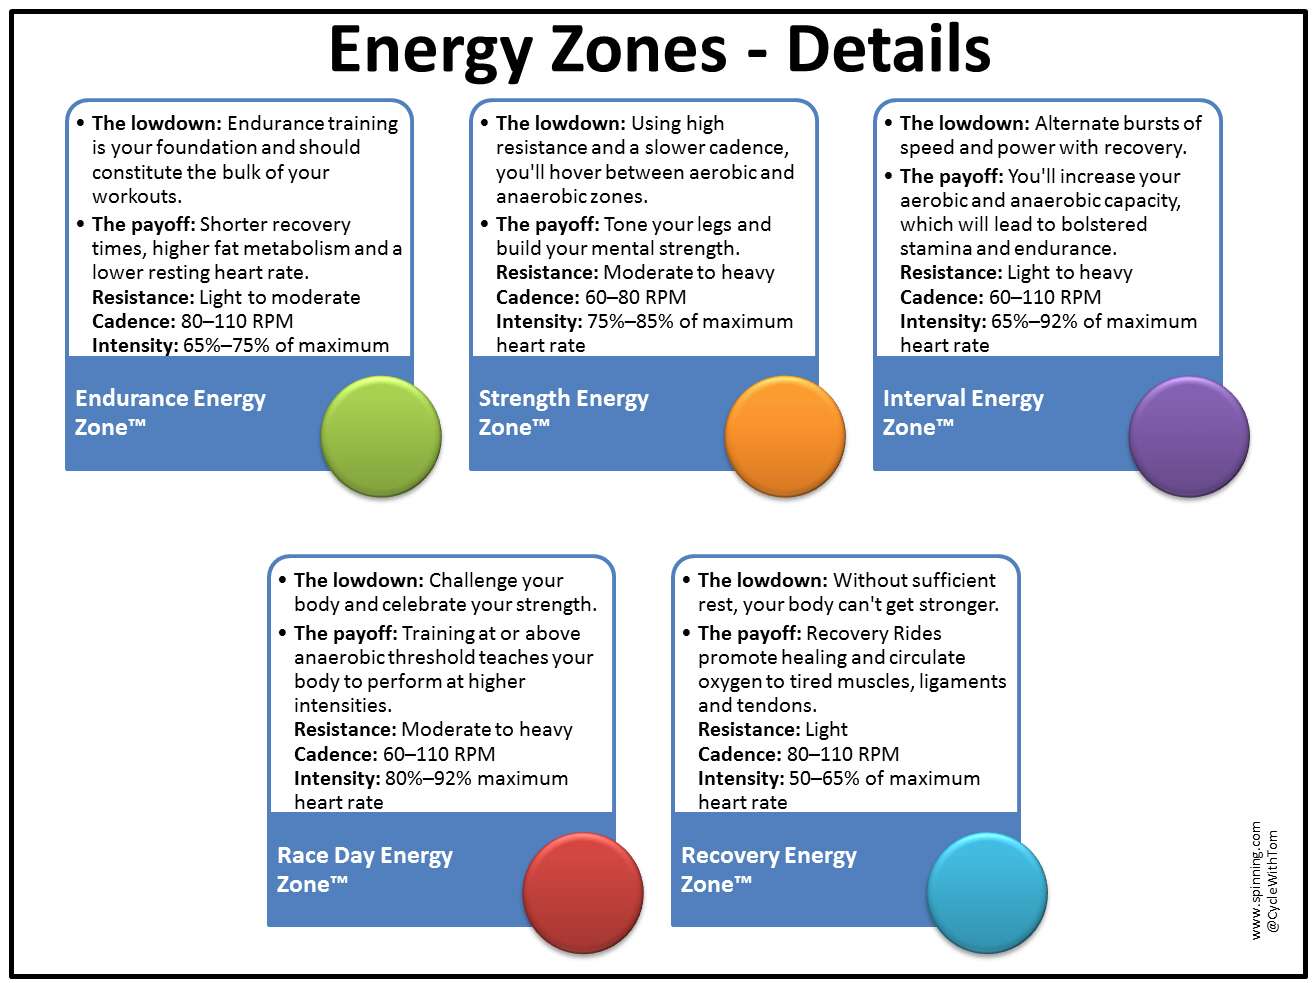 A Quick Reference Guide to Spinning Energy Zones for Heart Rate Training